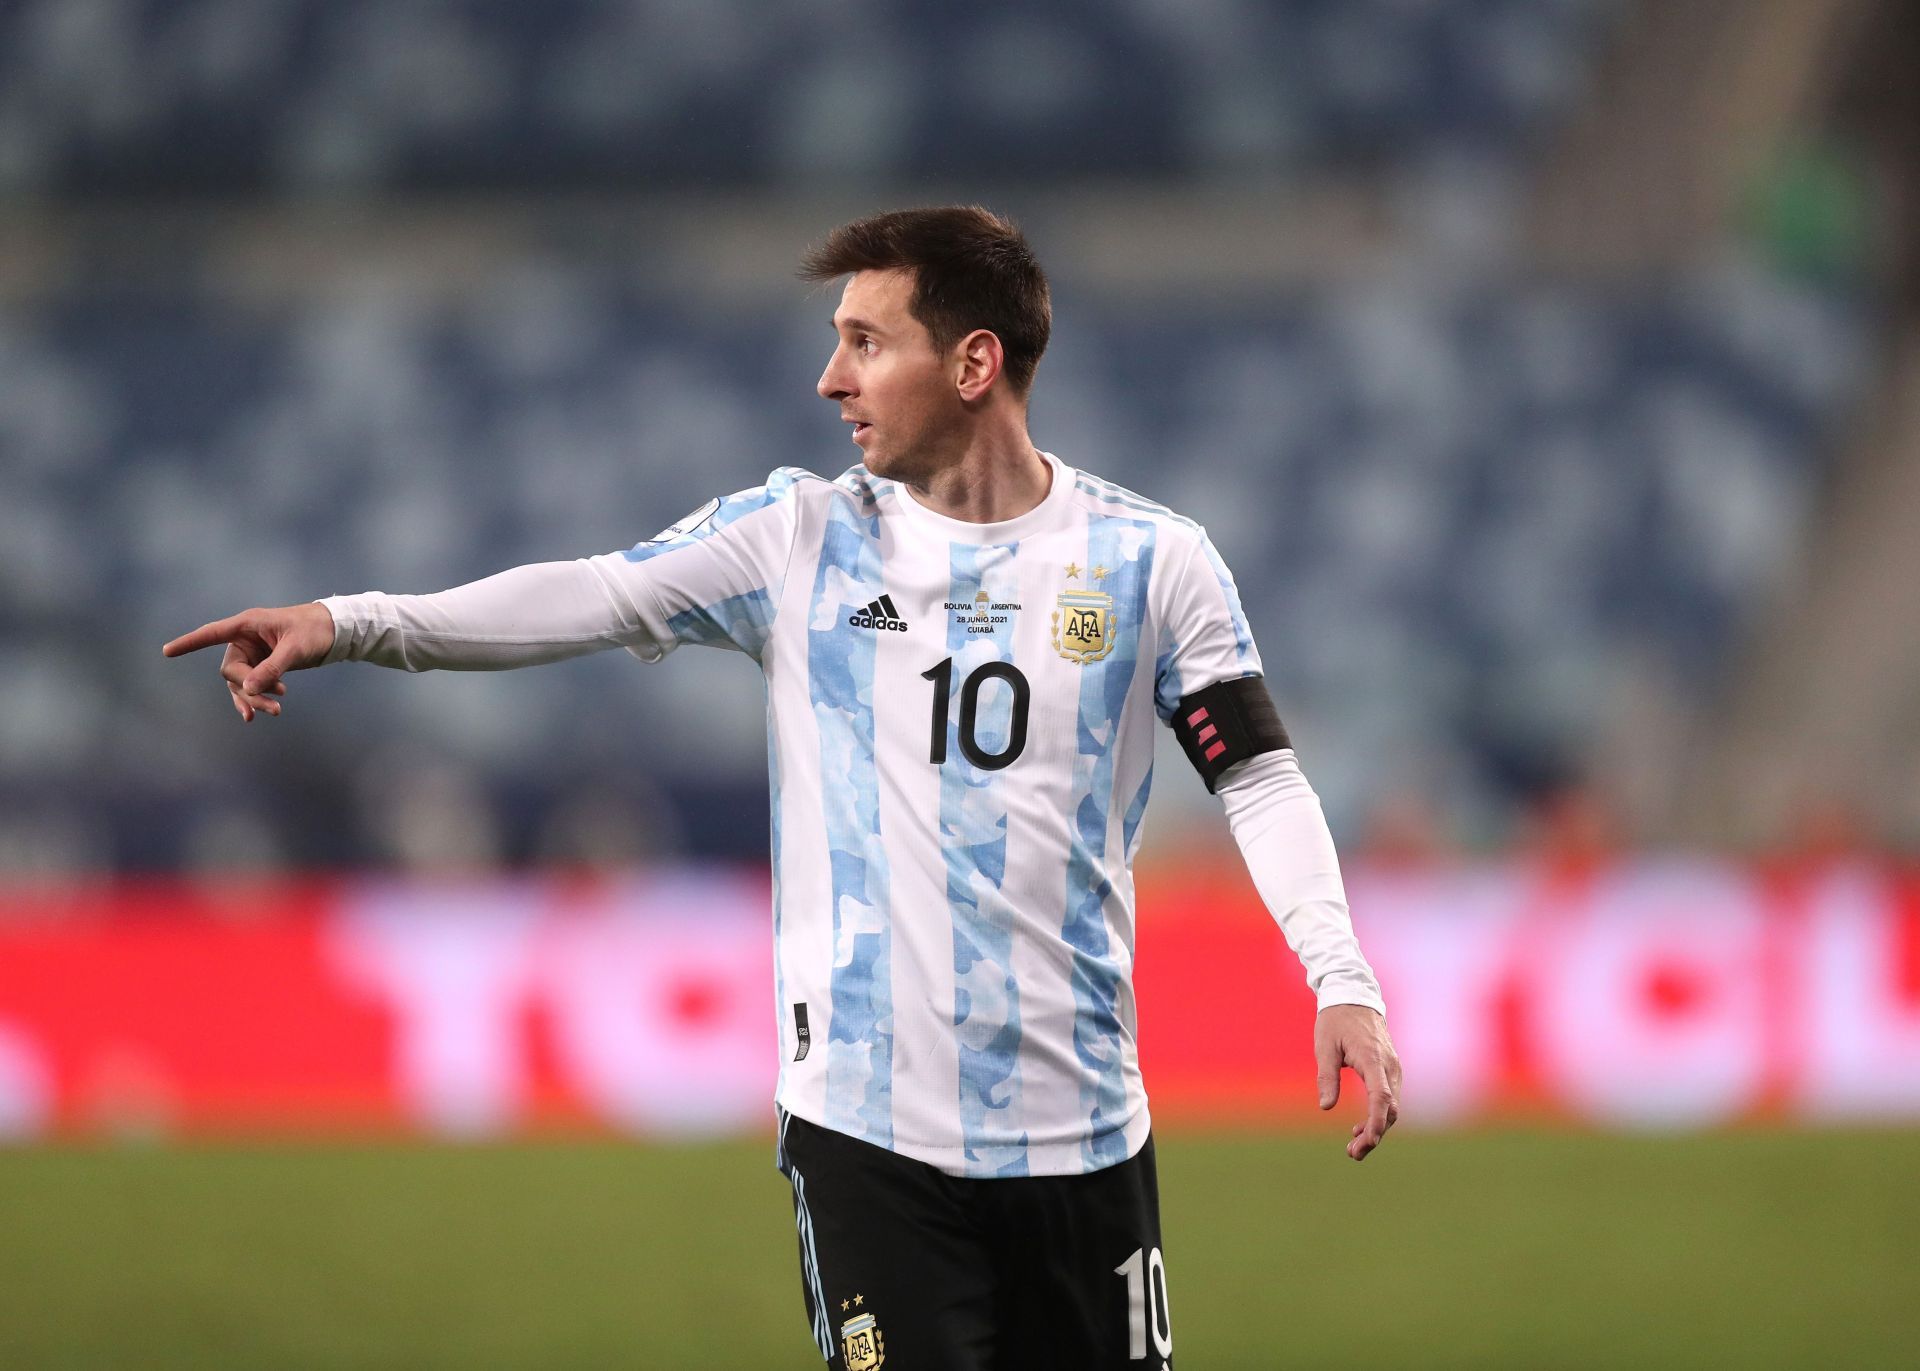 Lionel Messi on his record-breaking appearance for Argentina against Bolivia